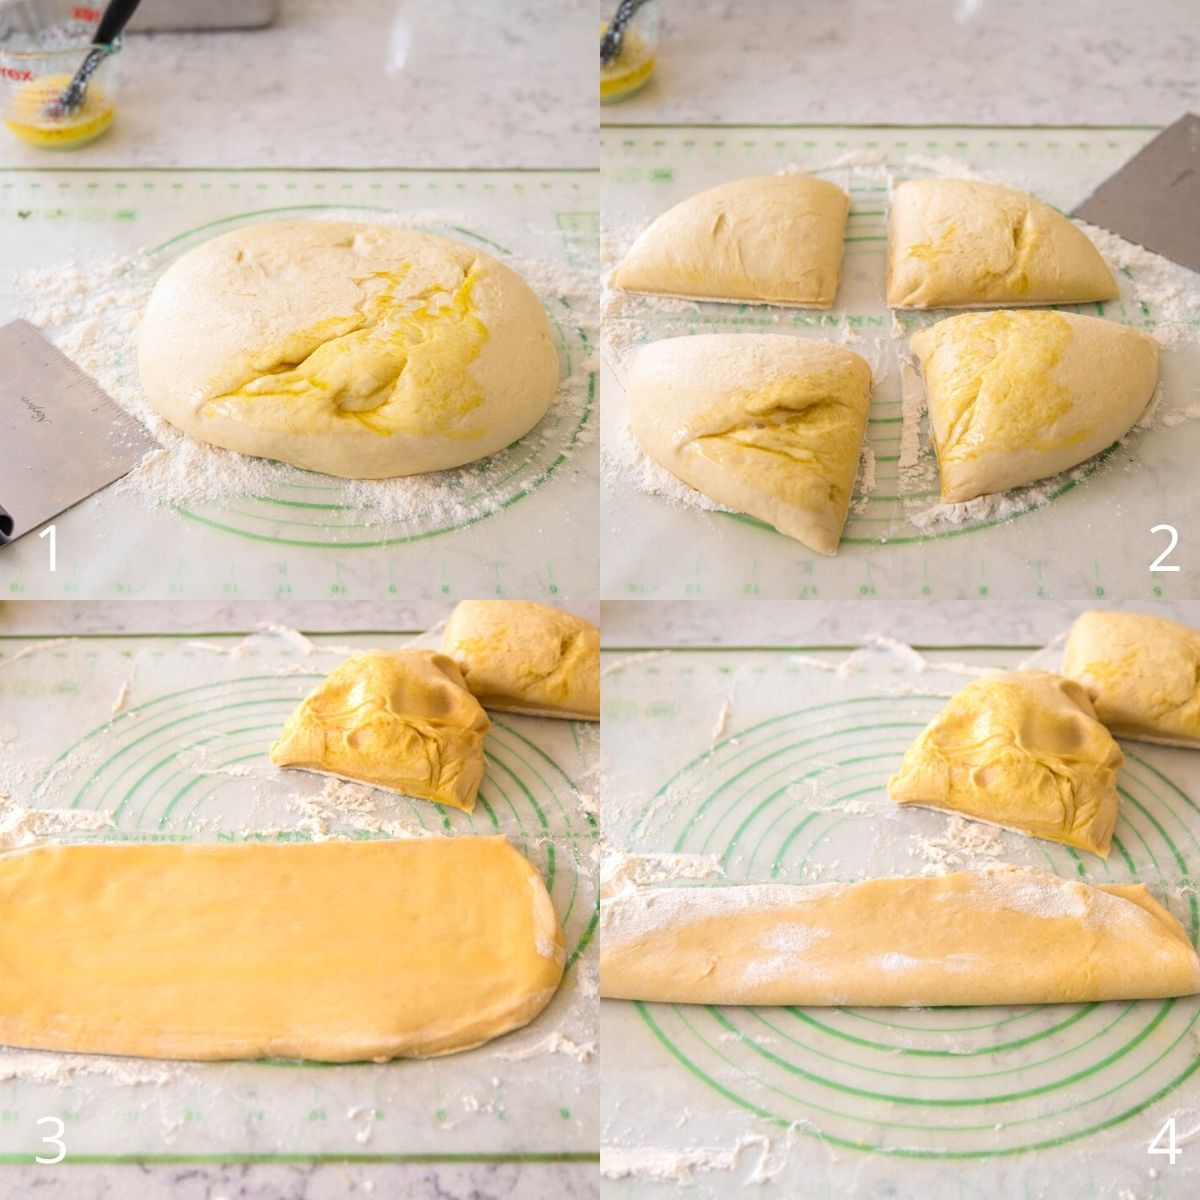 The dough has been portioned out into 4 pieces and then rolled and folded.